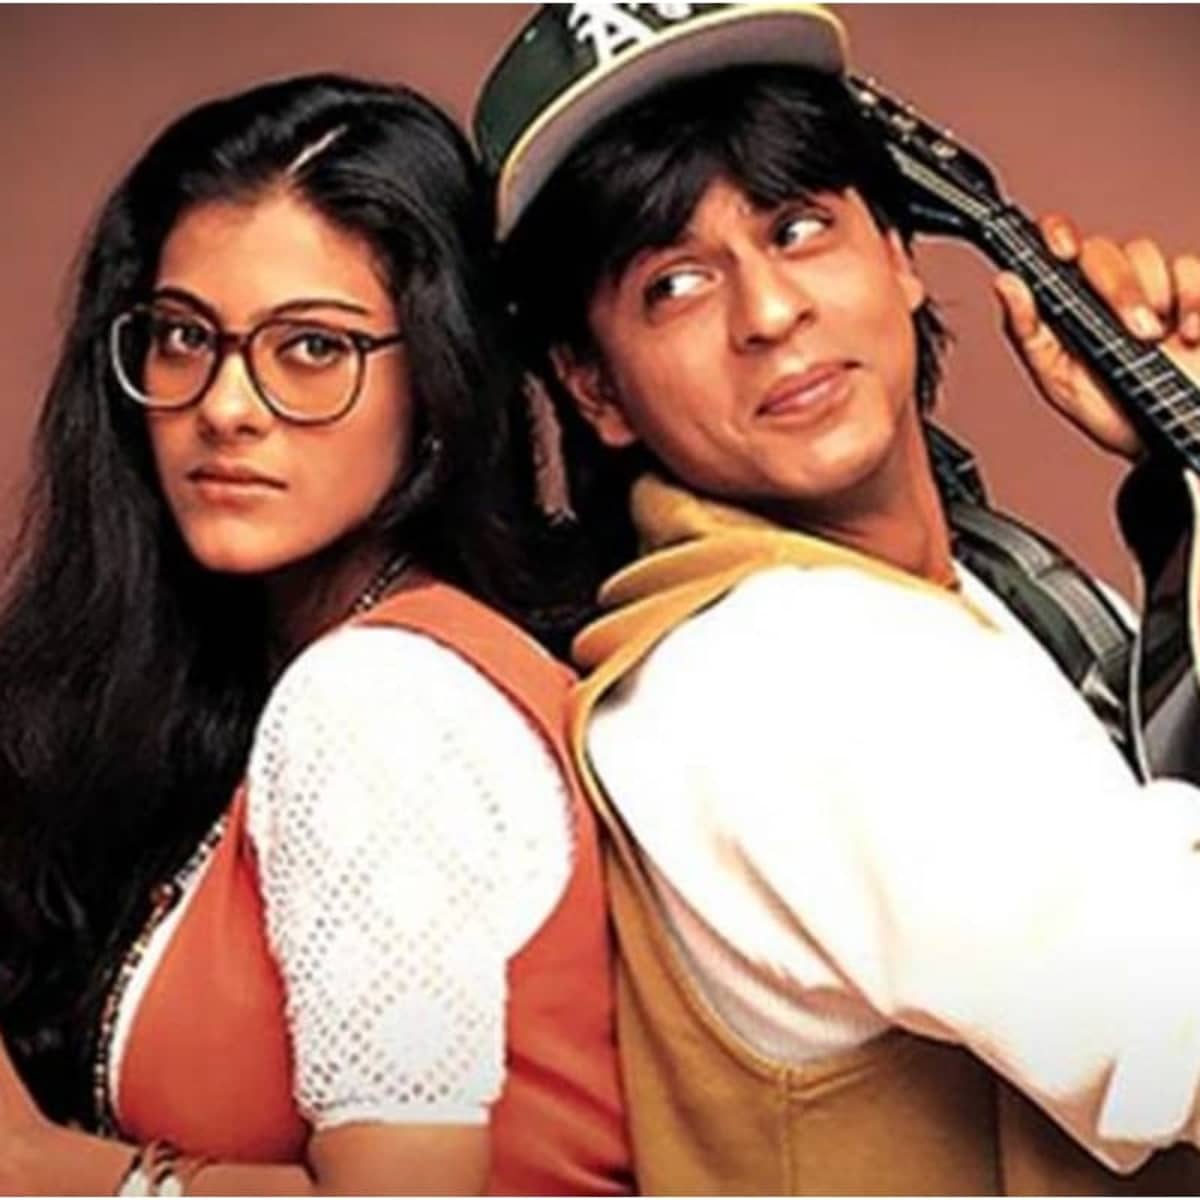 When Shah Rukh Khan Said 'I Didn't Go To Bed With Her' On Reports Of Him  Having An Affair With Kajol